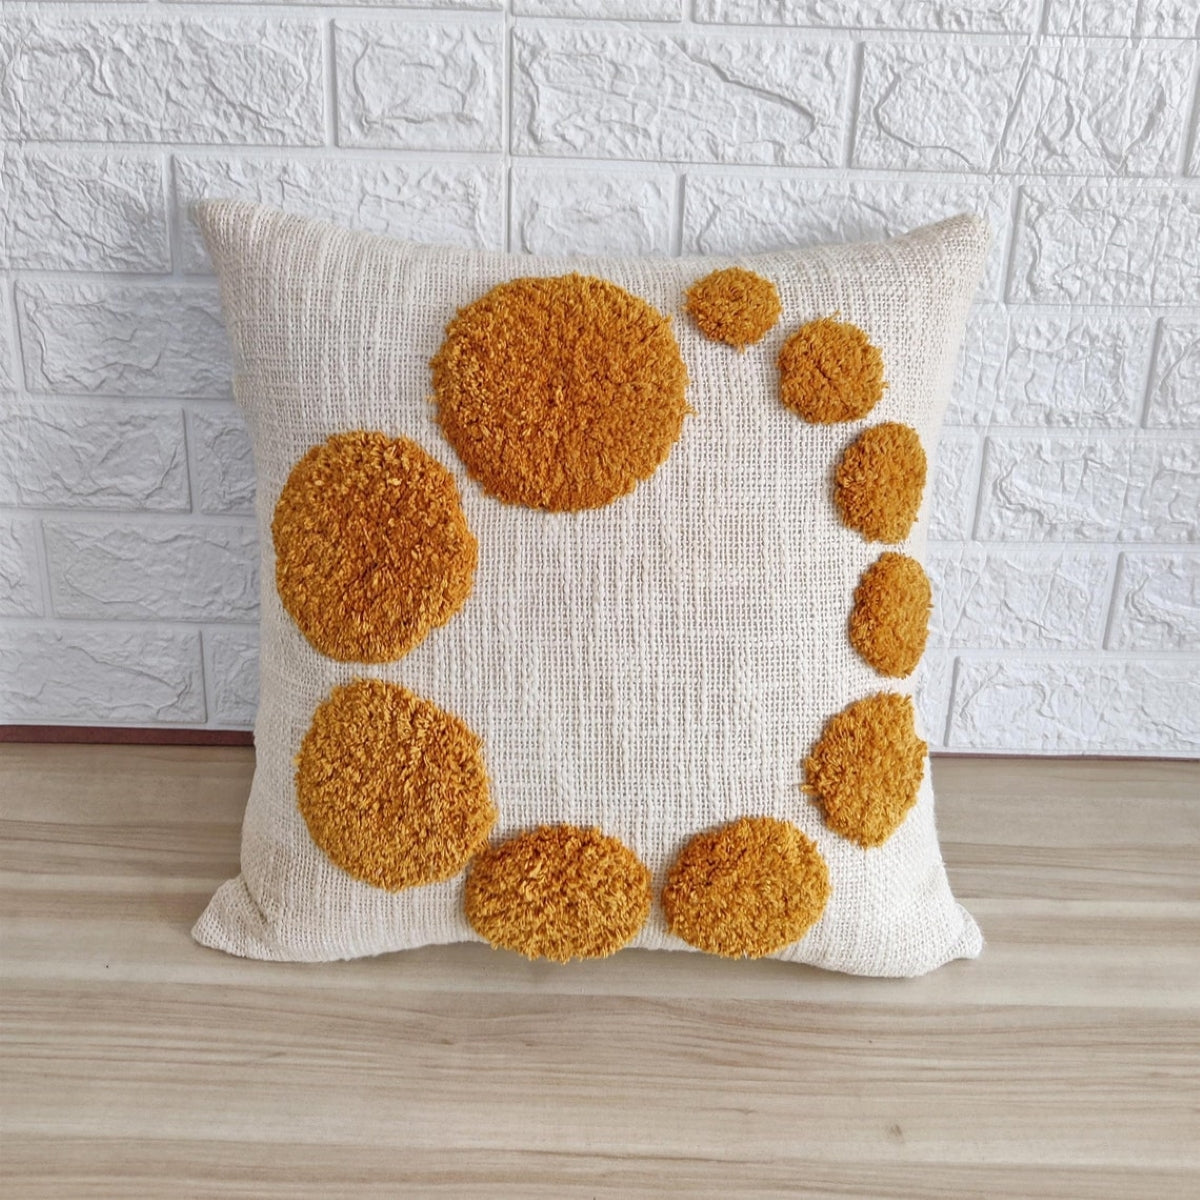 Ivory & Mustard Yellow Circle Design Handtufted Cushion Cover